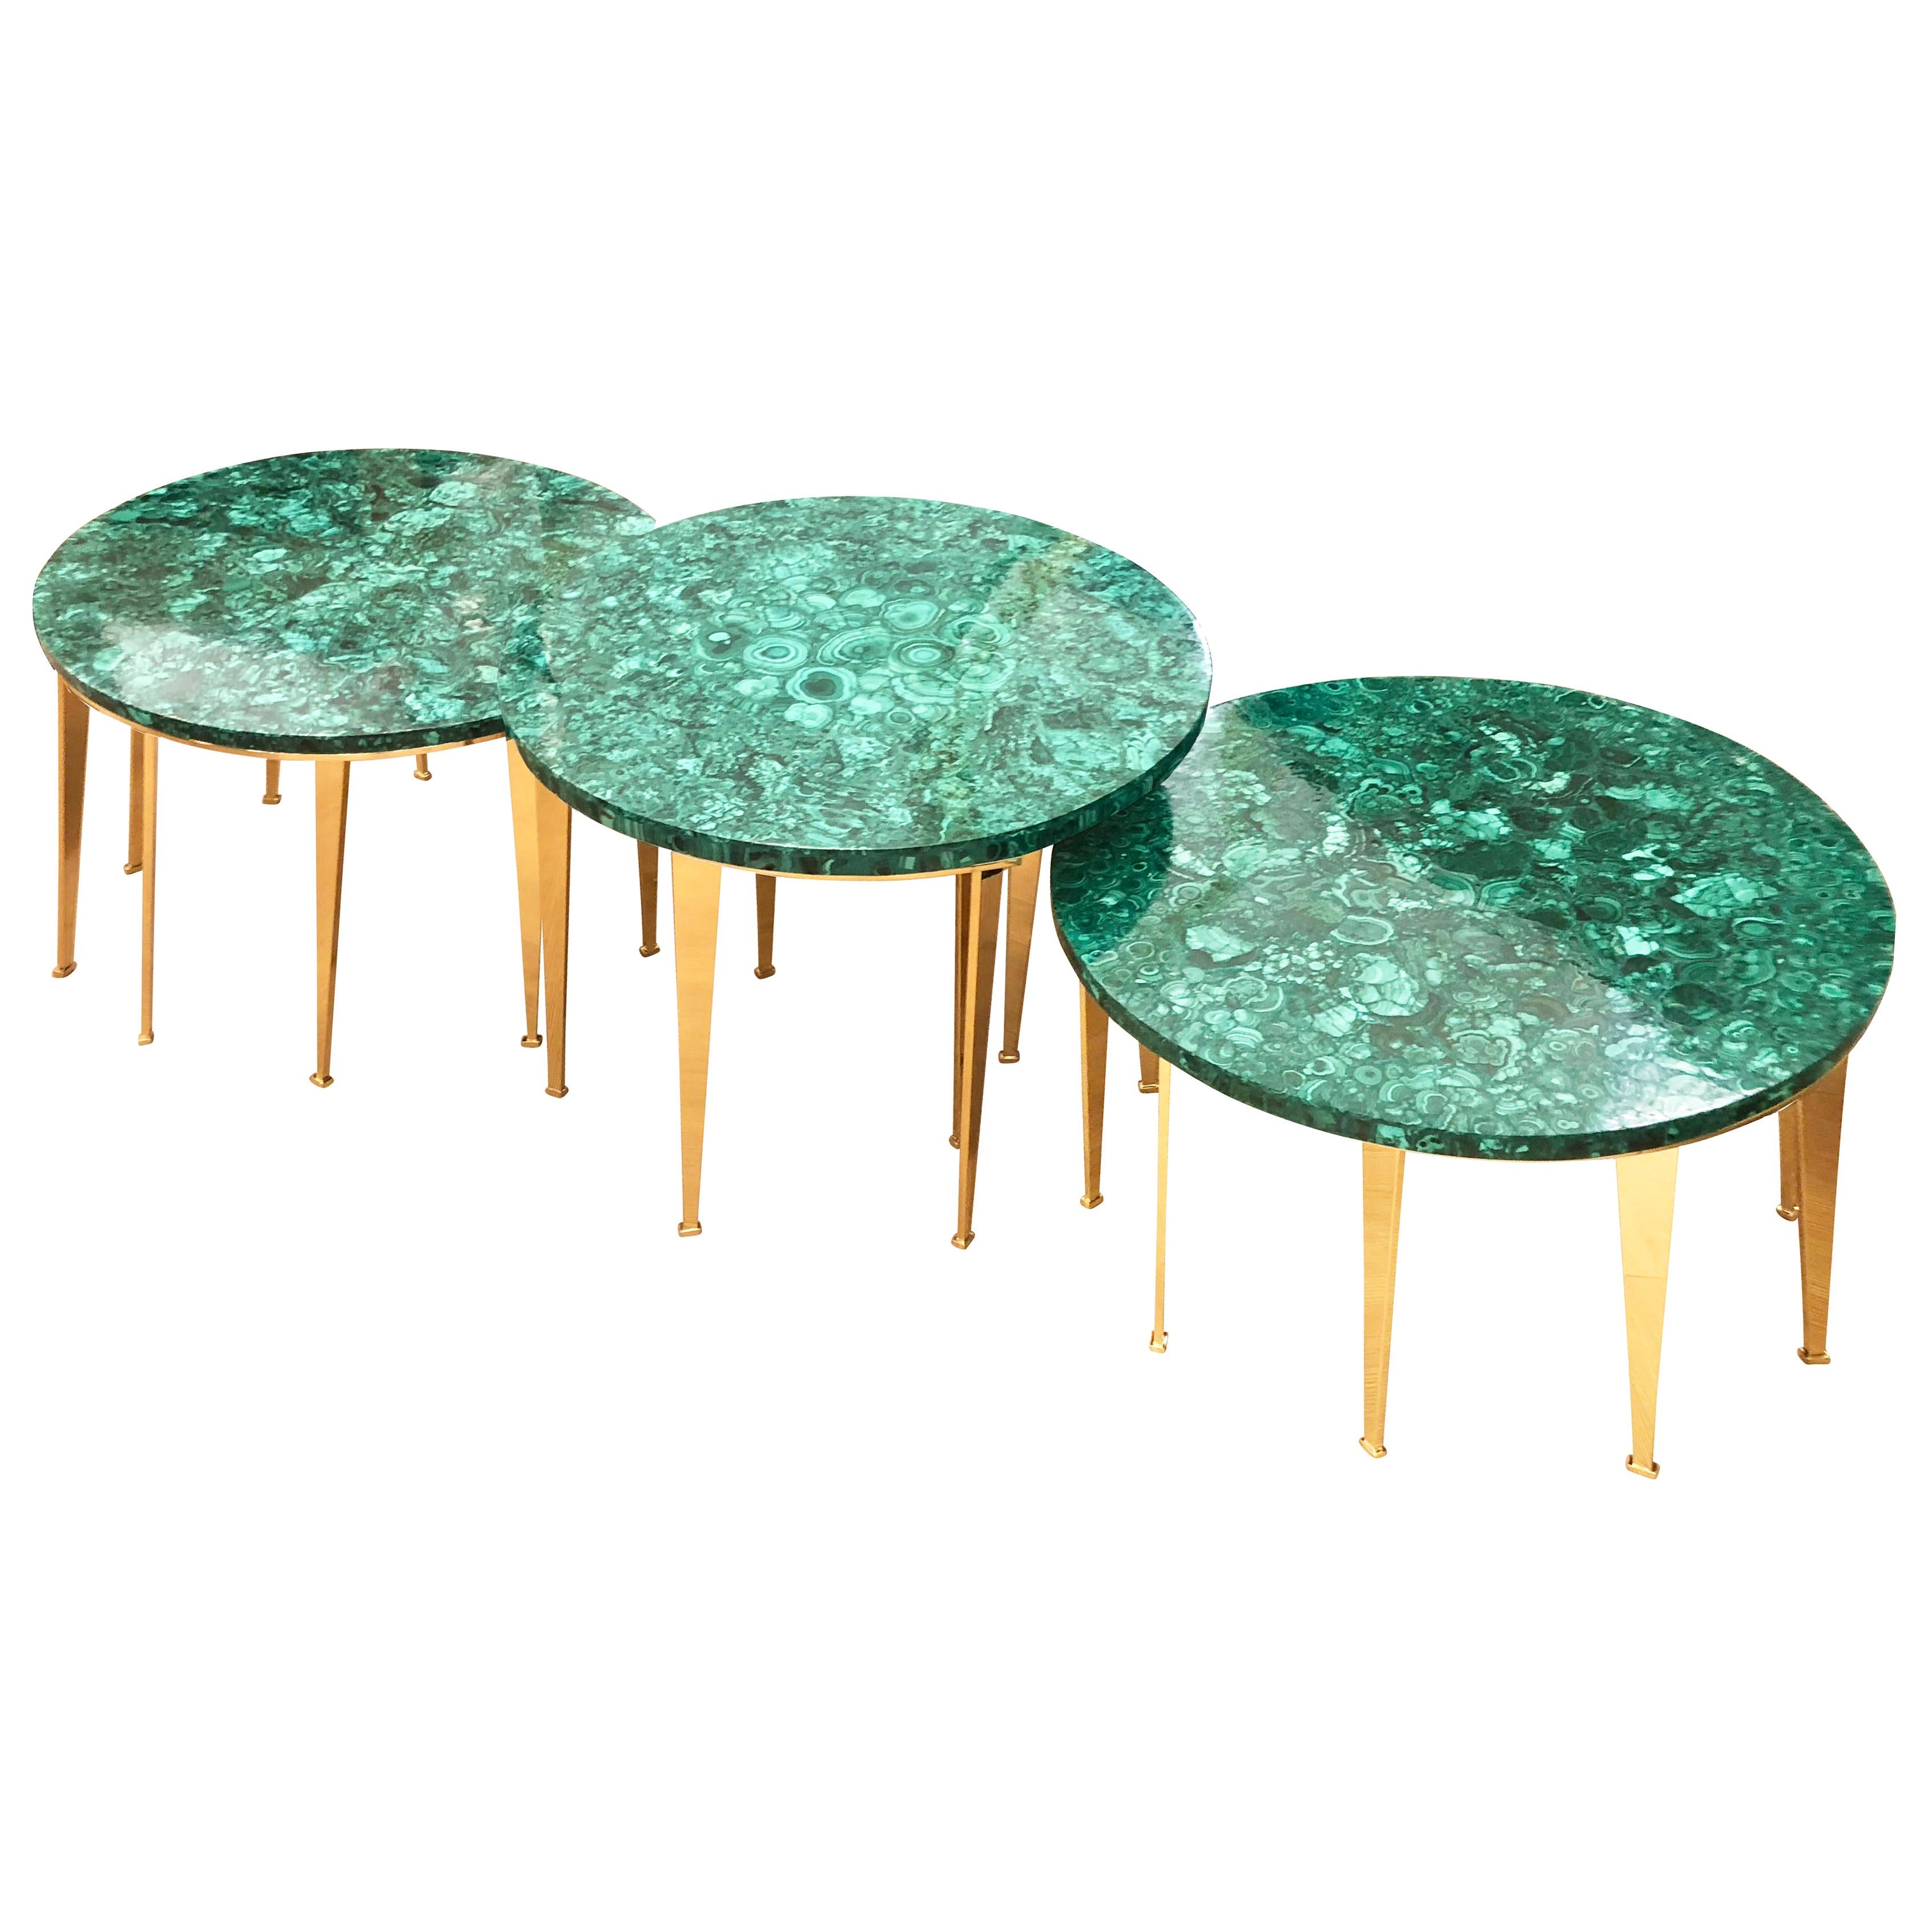 Modern Malachite Coffee Table or Side Tables by Forma for Gaspare Asaro